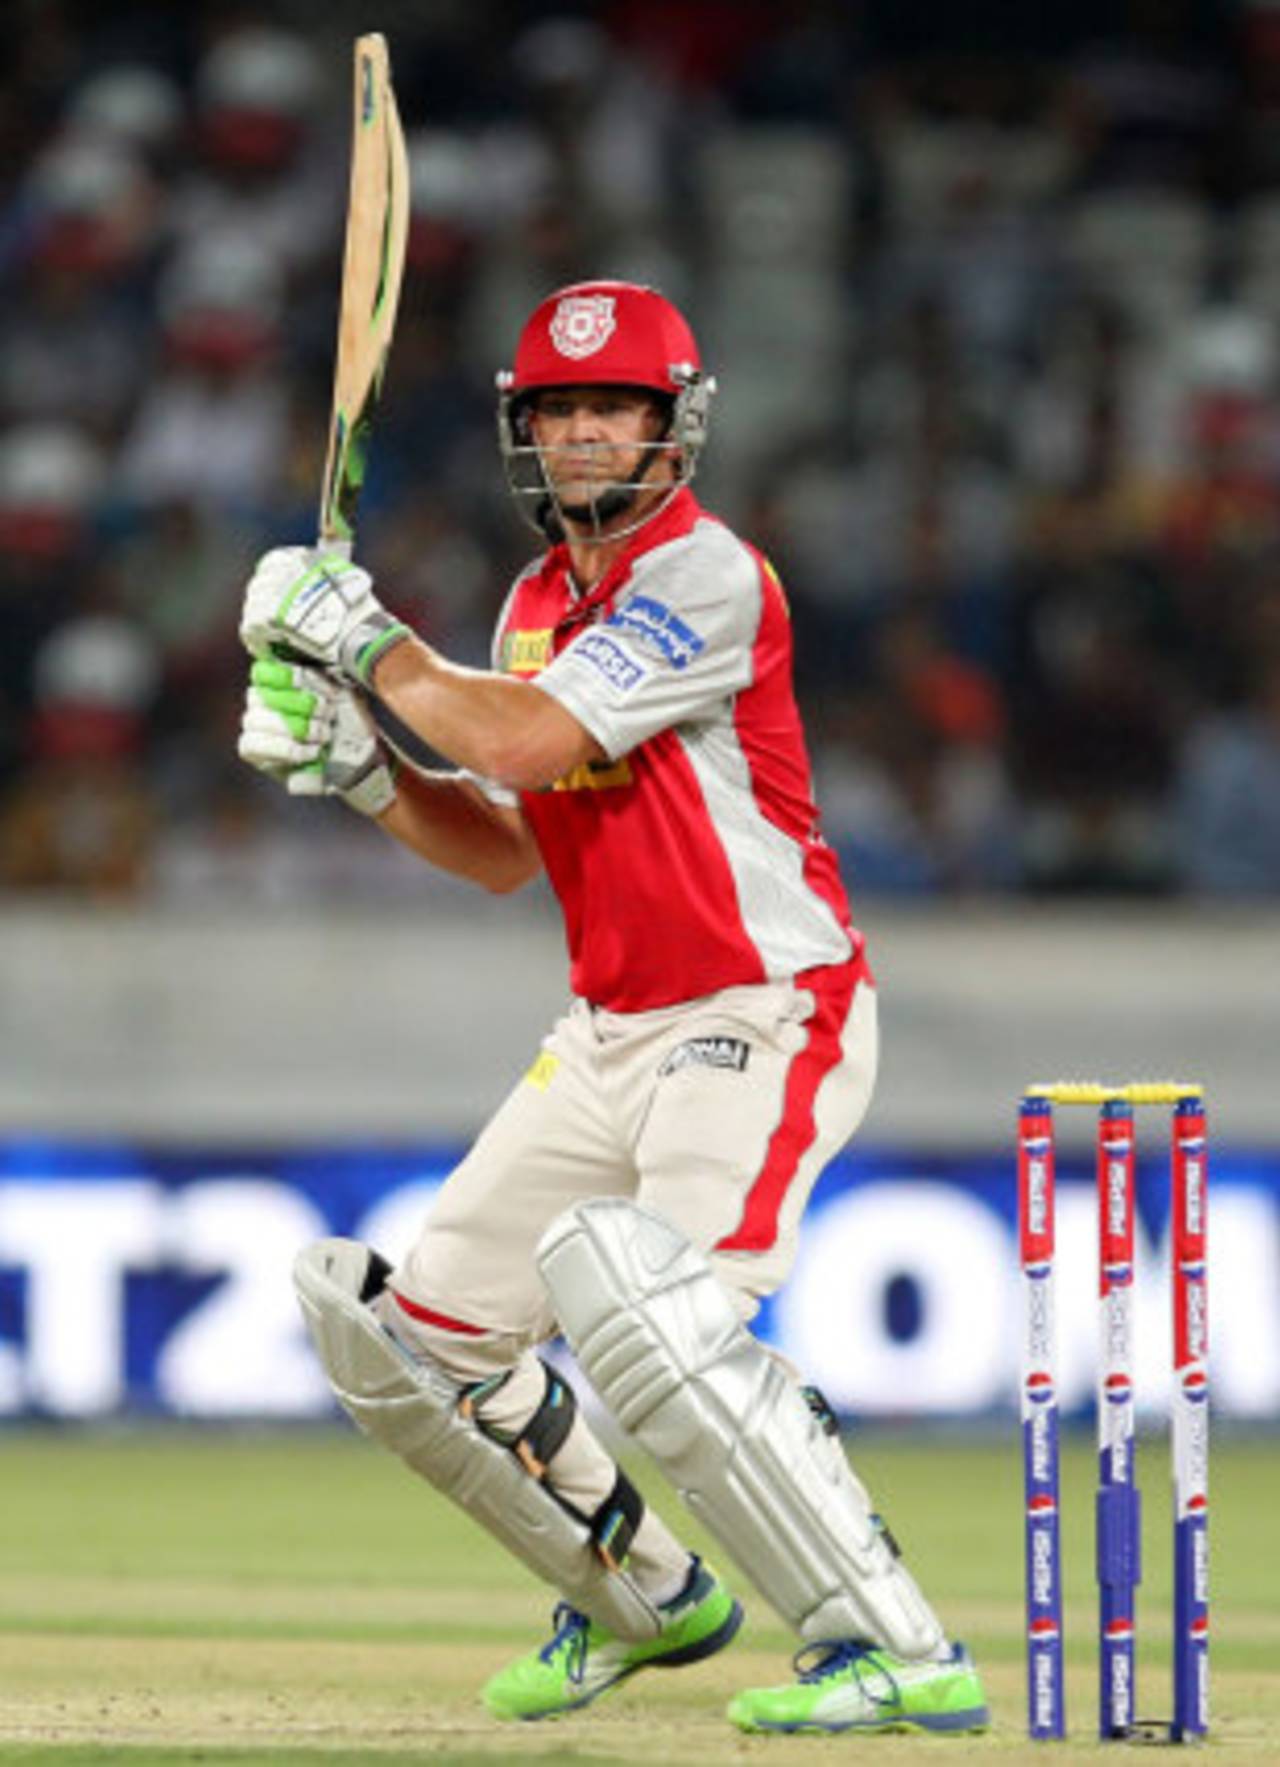 Adam Gilchrist played some cracking shots early on, Sunrisers Hyderabad v Kings XI Punjab, IPL, Hyderabad, April 19, 2013